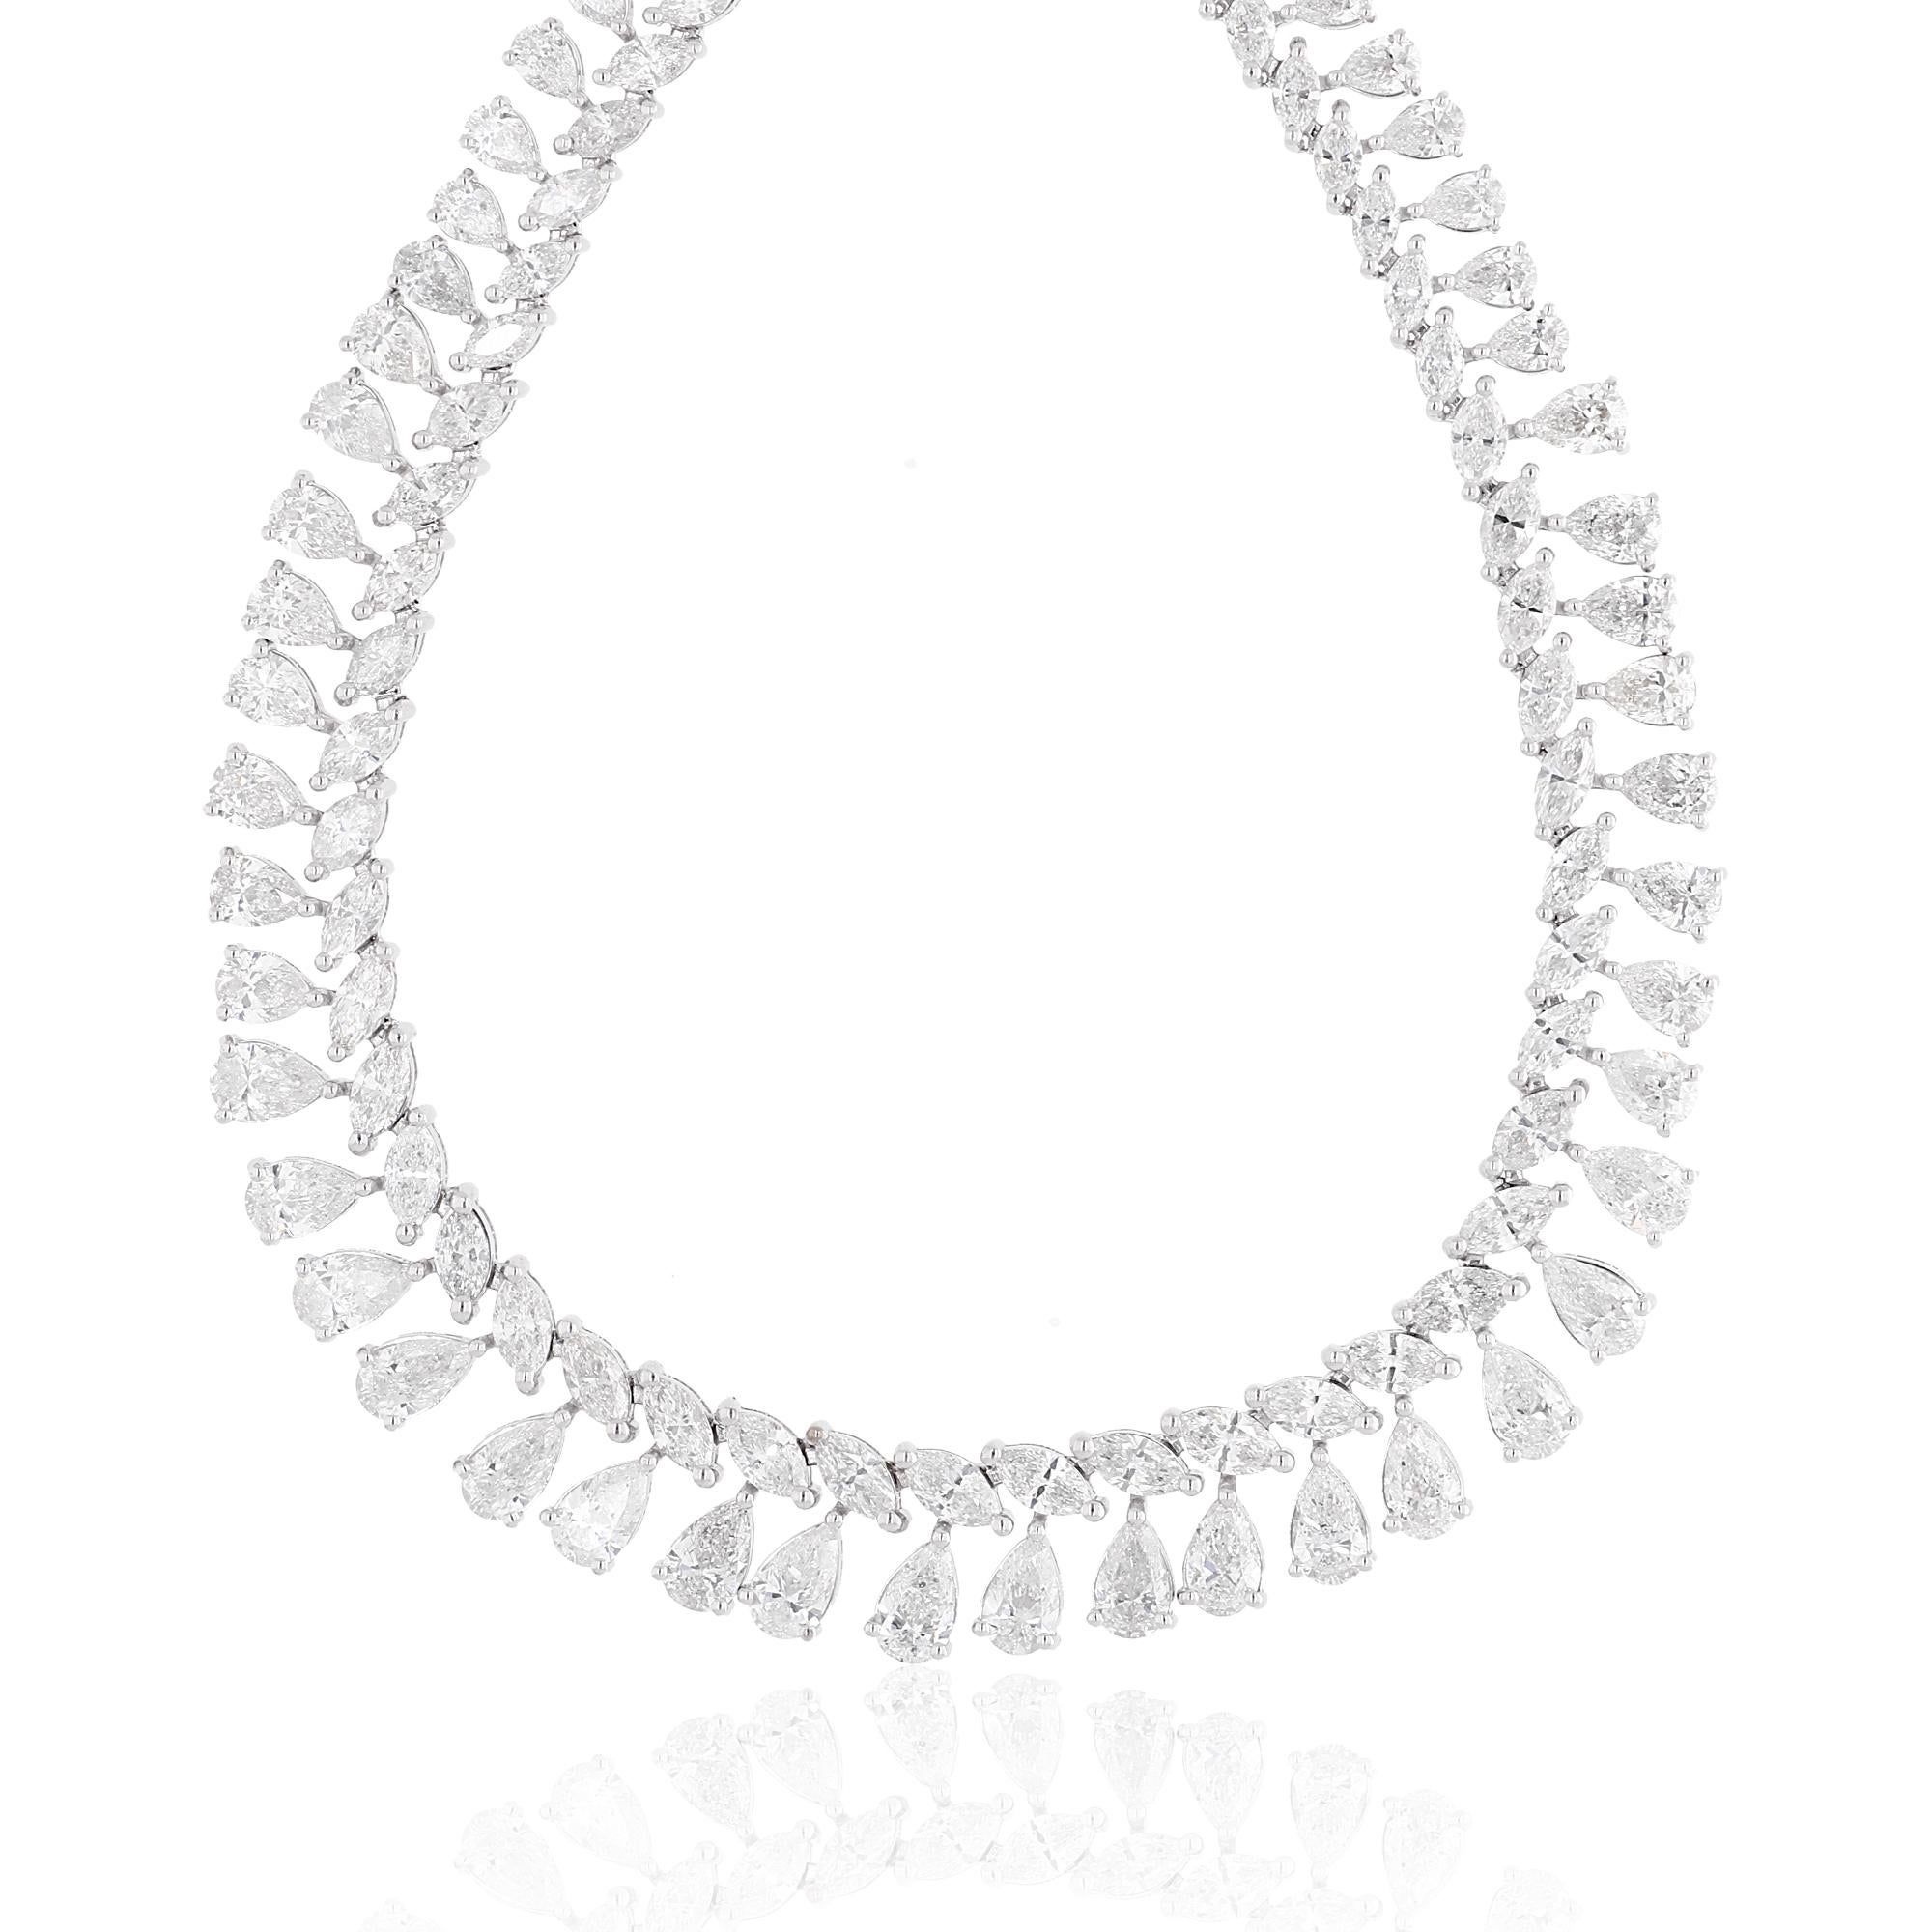 The design of the necklace is both classic and timeless. The pear and marquise diamonds are delicately arranged to form an elegant and graceful pendant that hangs from a 14 karat white gold chain. The chain is adjustable, allowing for a customized